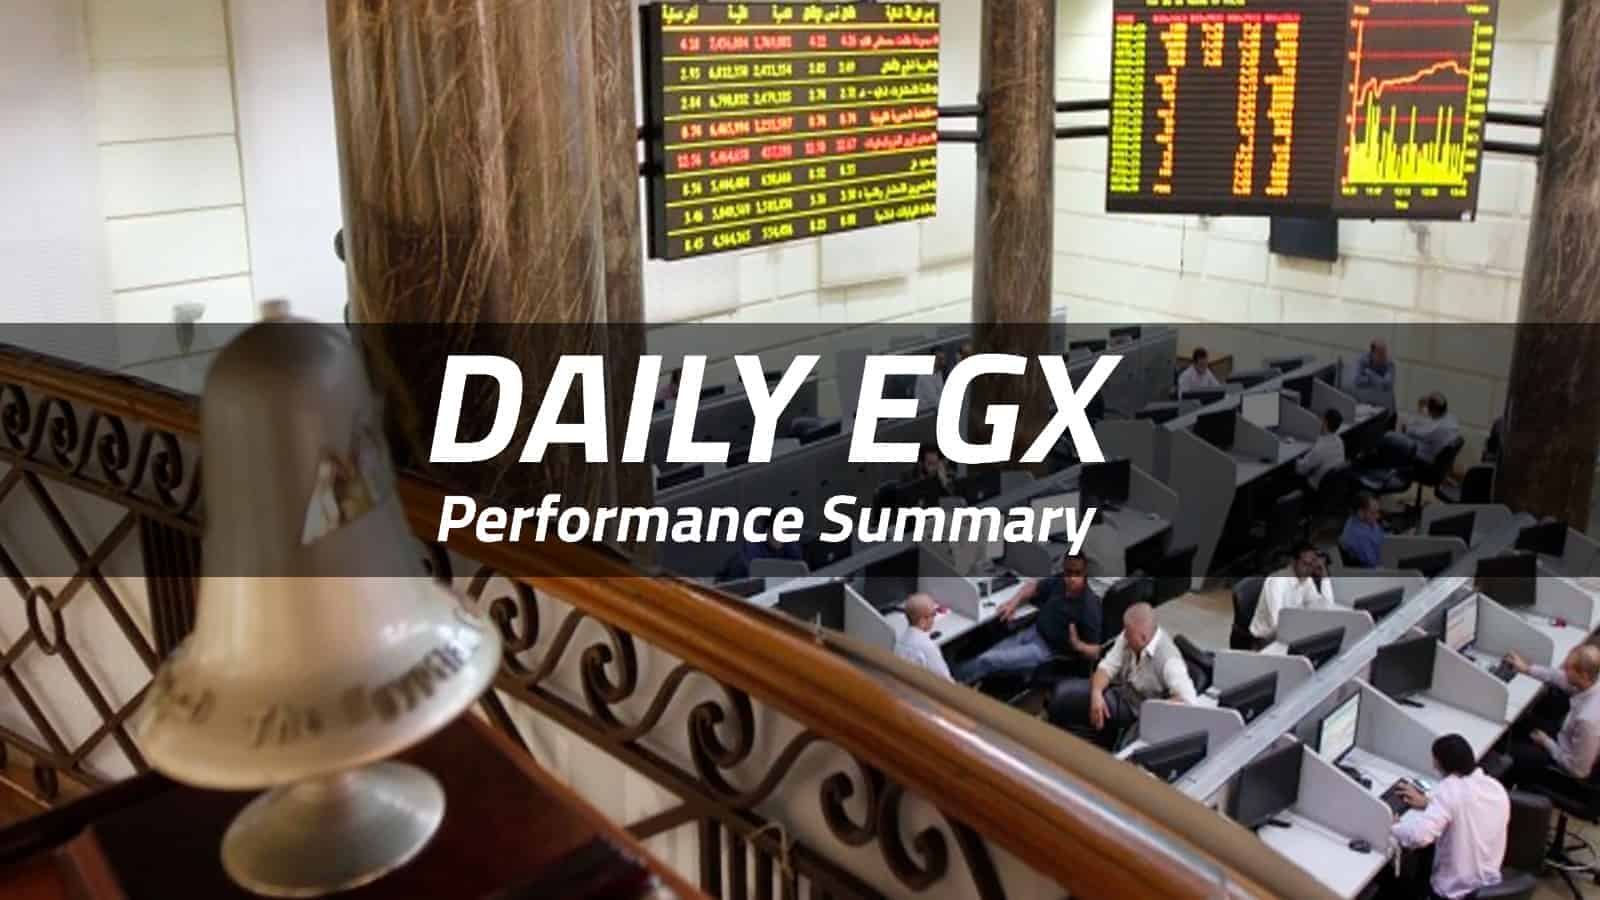 EGX’s indices show mixed performance on Tuesday